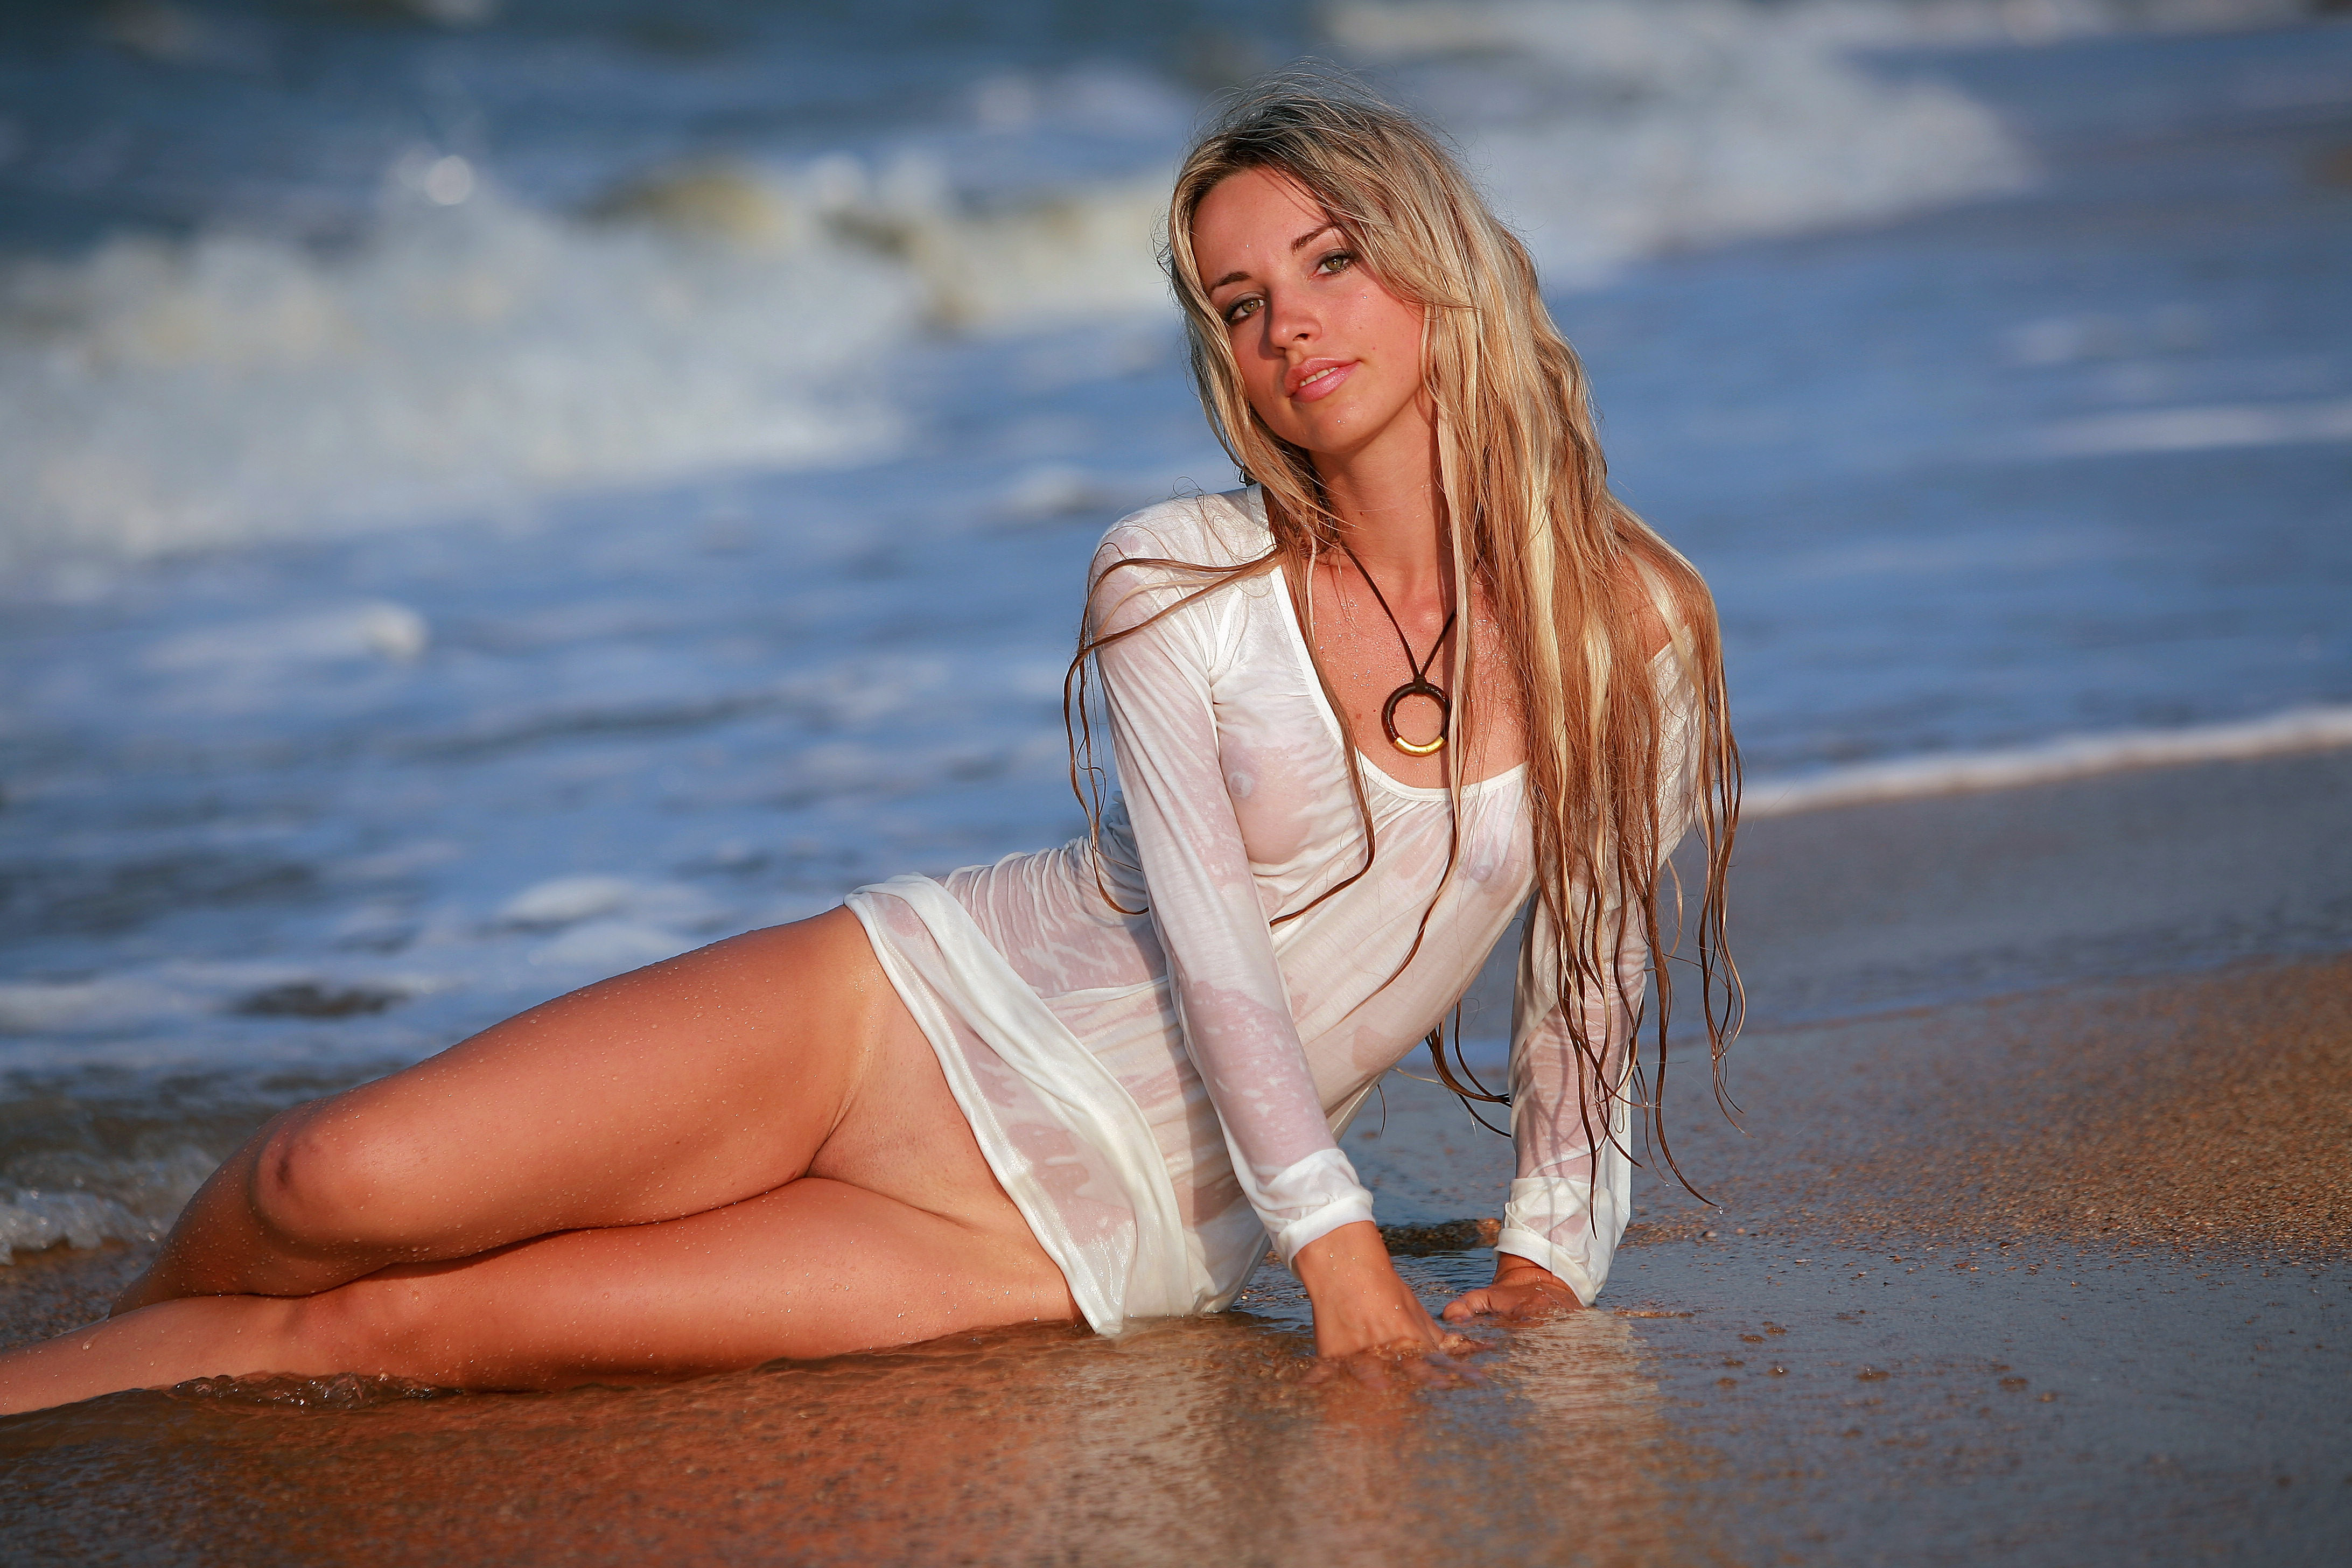 Russian Blonde Small Tits - Wallpaper natalia volkova, natalia b, alena h, russian, blonde, sea, beach,  shaved pussy, wet, skinny, delicious, sexy, small tits, tiny tits, perfect  girl, tippy toes, hot ass, perfect body, perfect tits, perfect